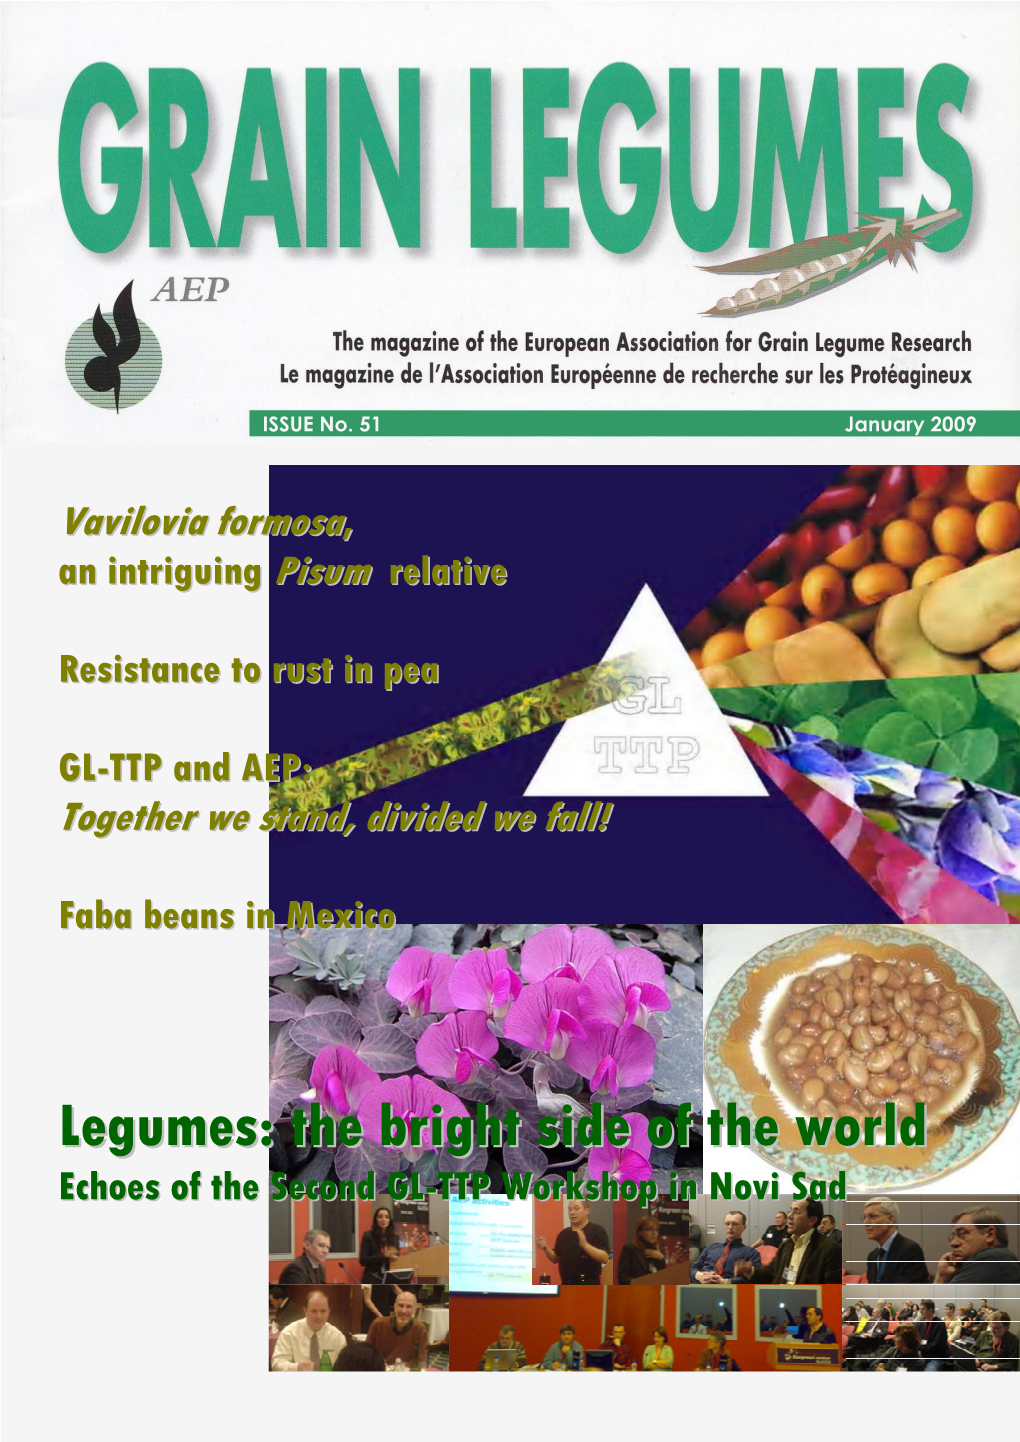 Legumes: the Bright Side of the World (Echoes of the Second GL-TTP Workshop) Team Composed by Noel Ellis, Tom 13 ������������ Warkentin and Kevin Pcphee